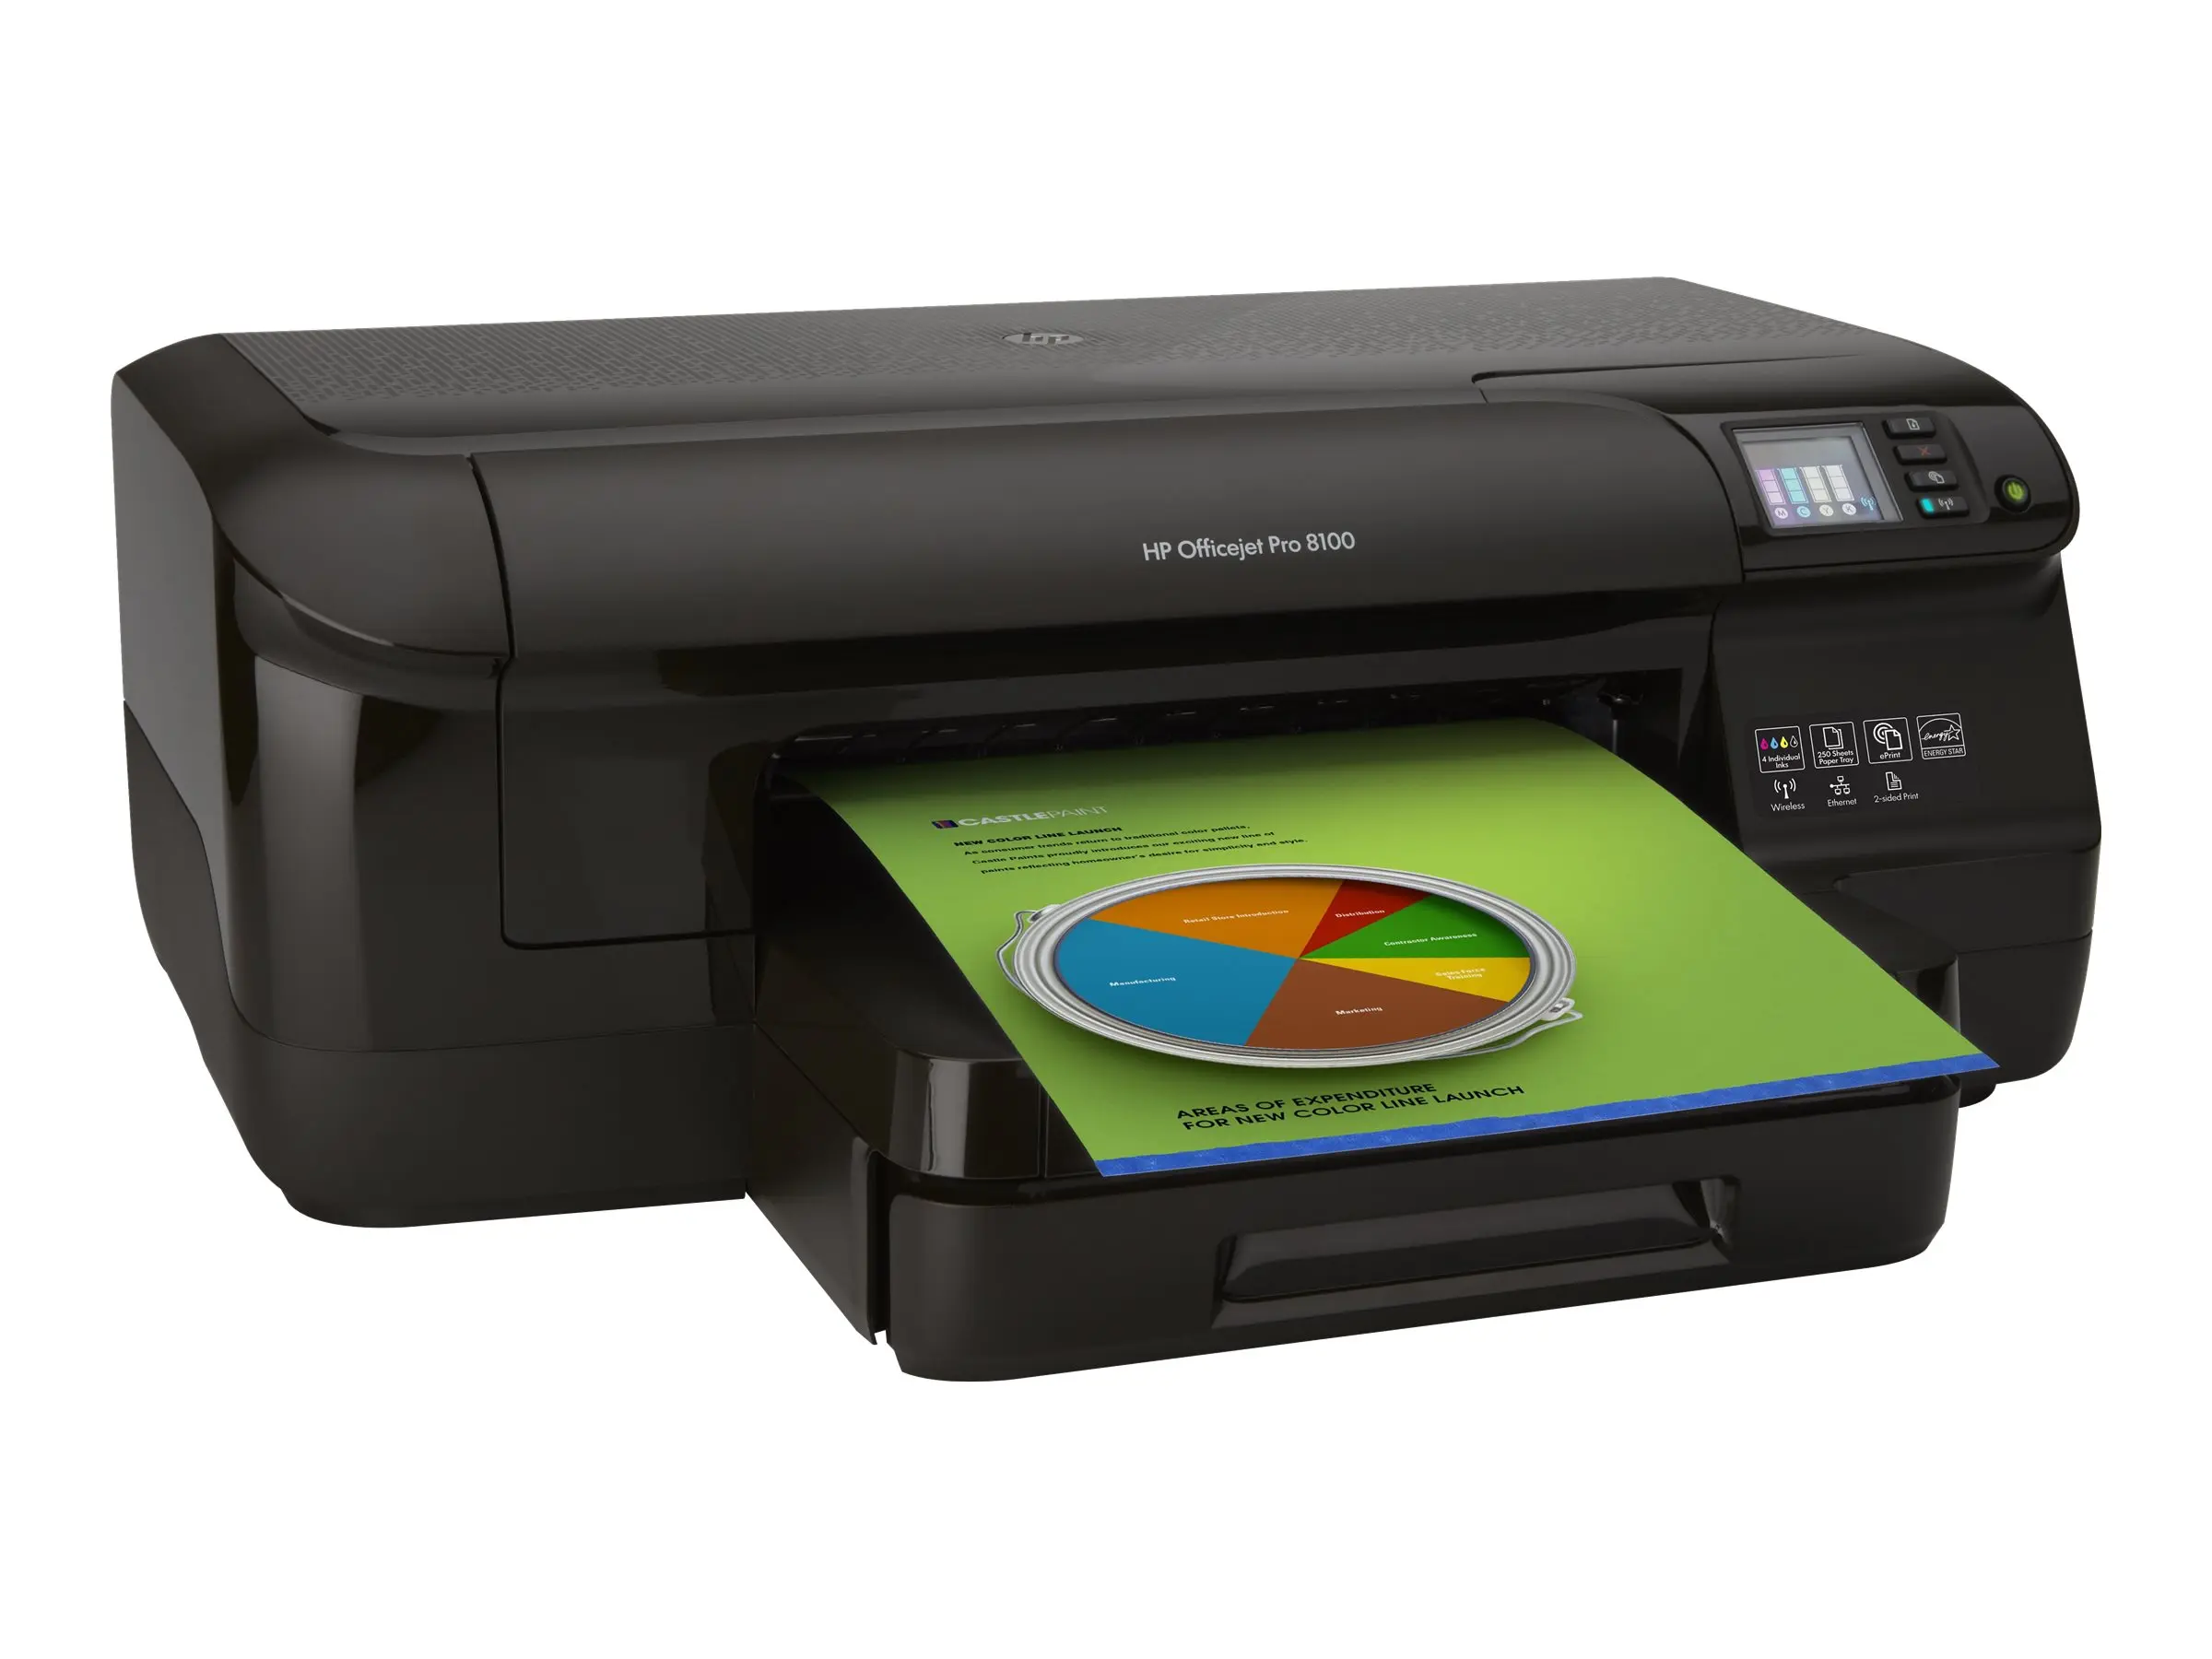 hewlett packard officejet pro 8100 ink colour eprinter - What is the difference between blue and green HP ink